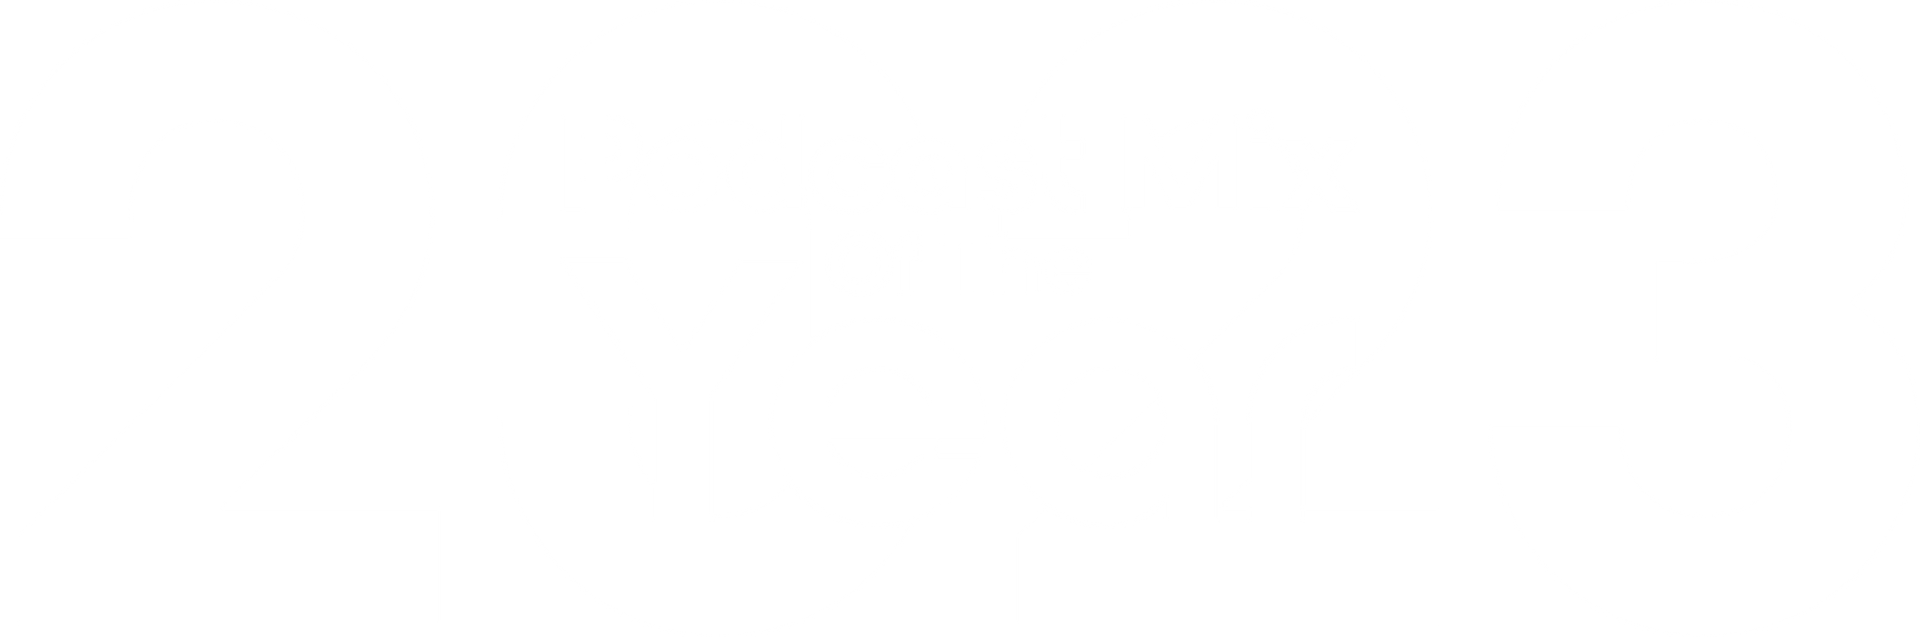 Little South Podcast Mix Of The Year 2023 logo.